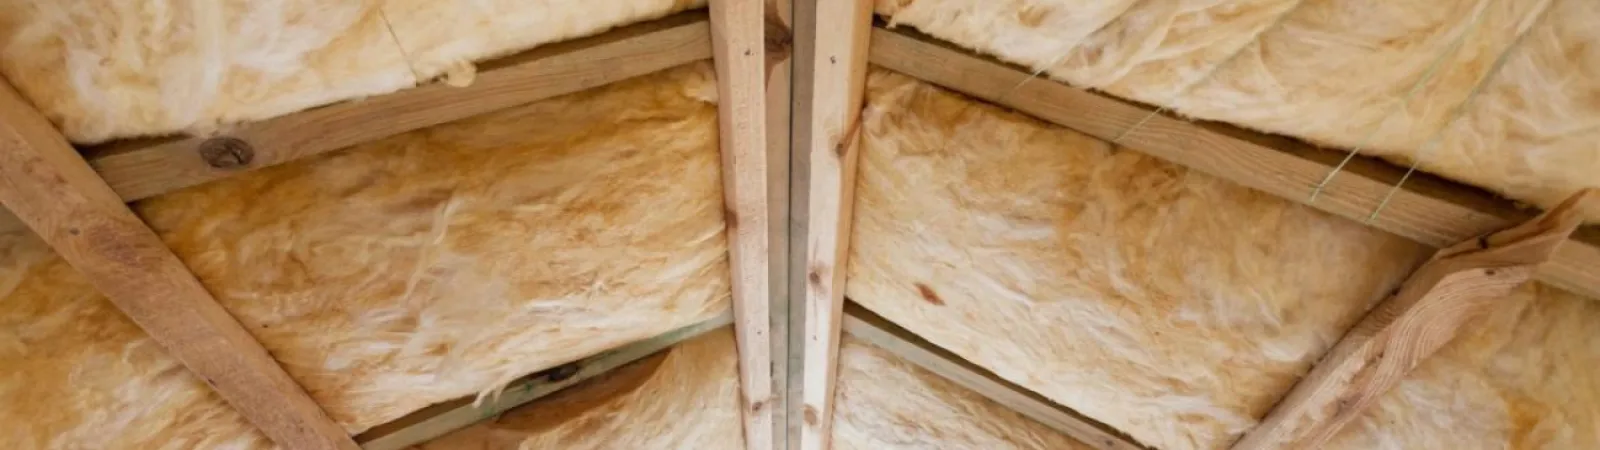 How Well Does Your Insulation... Insulate?